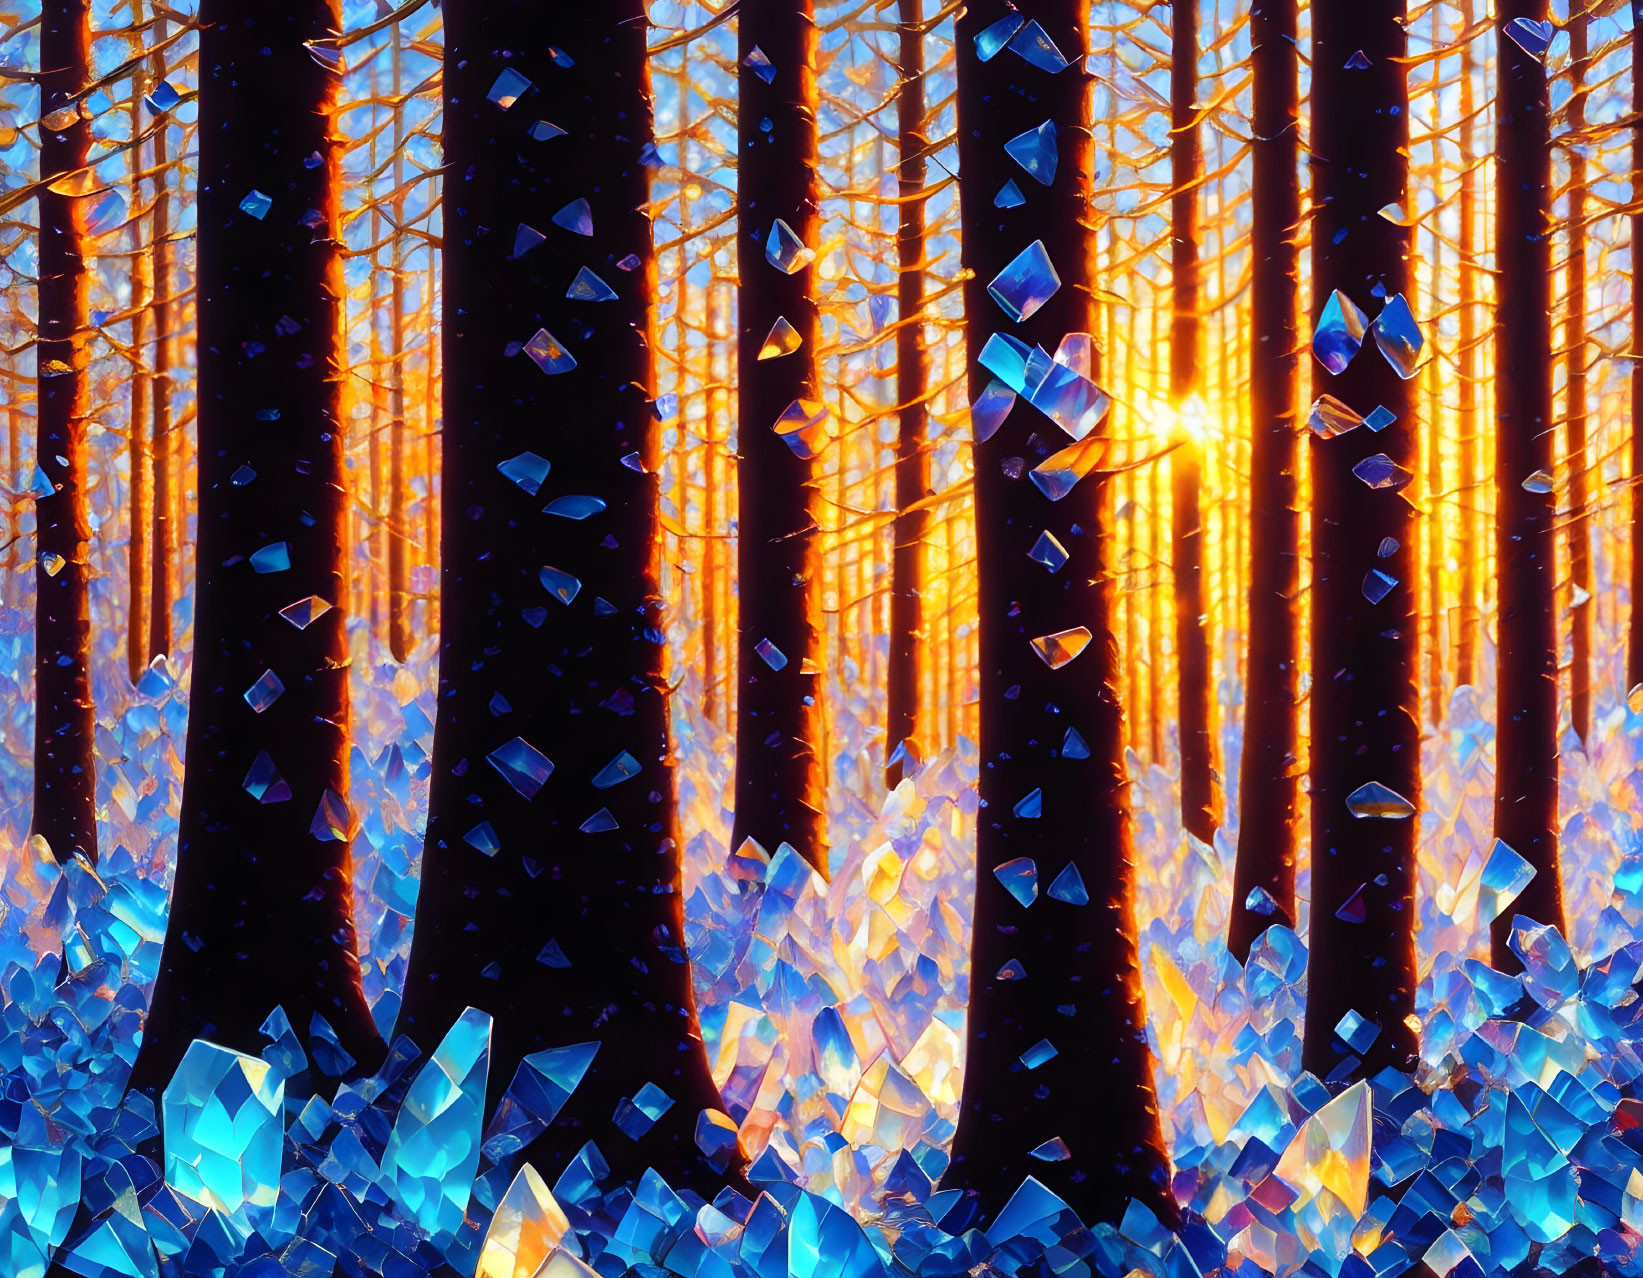 Crystal forest